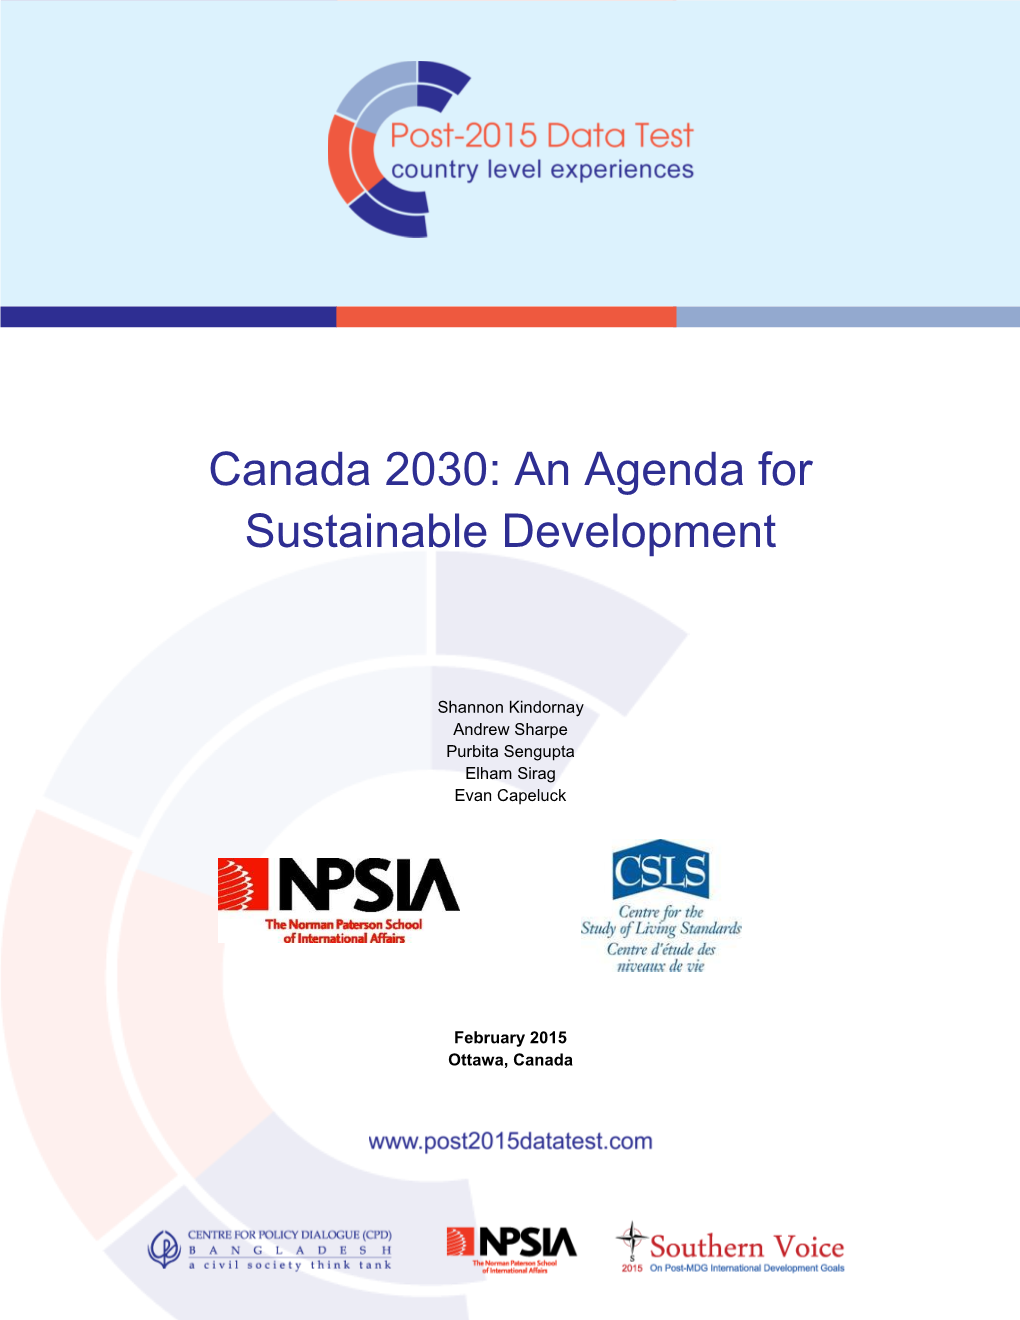 Canada 2030: an Agenda for Sustainable Development